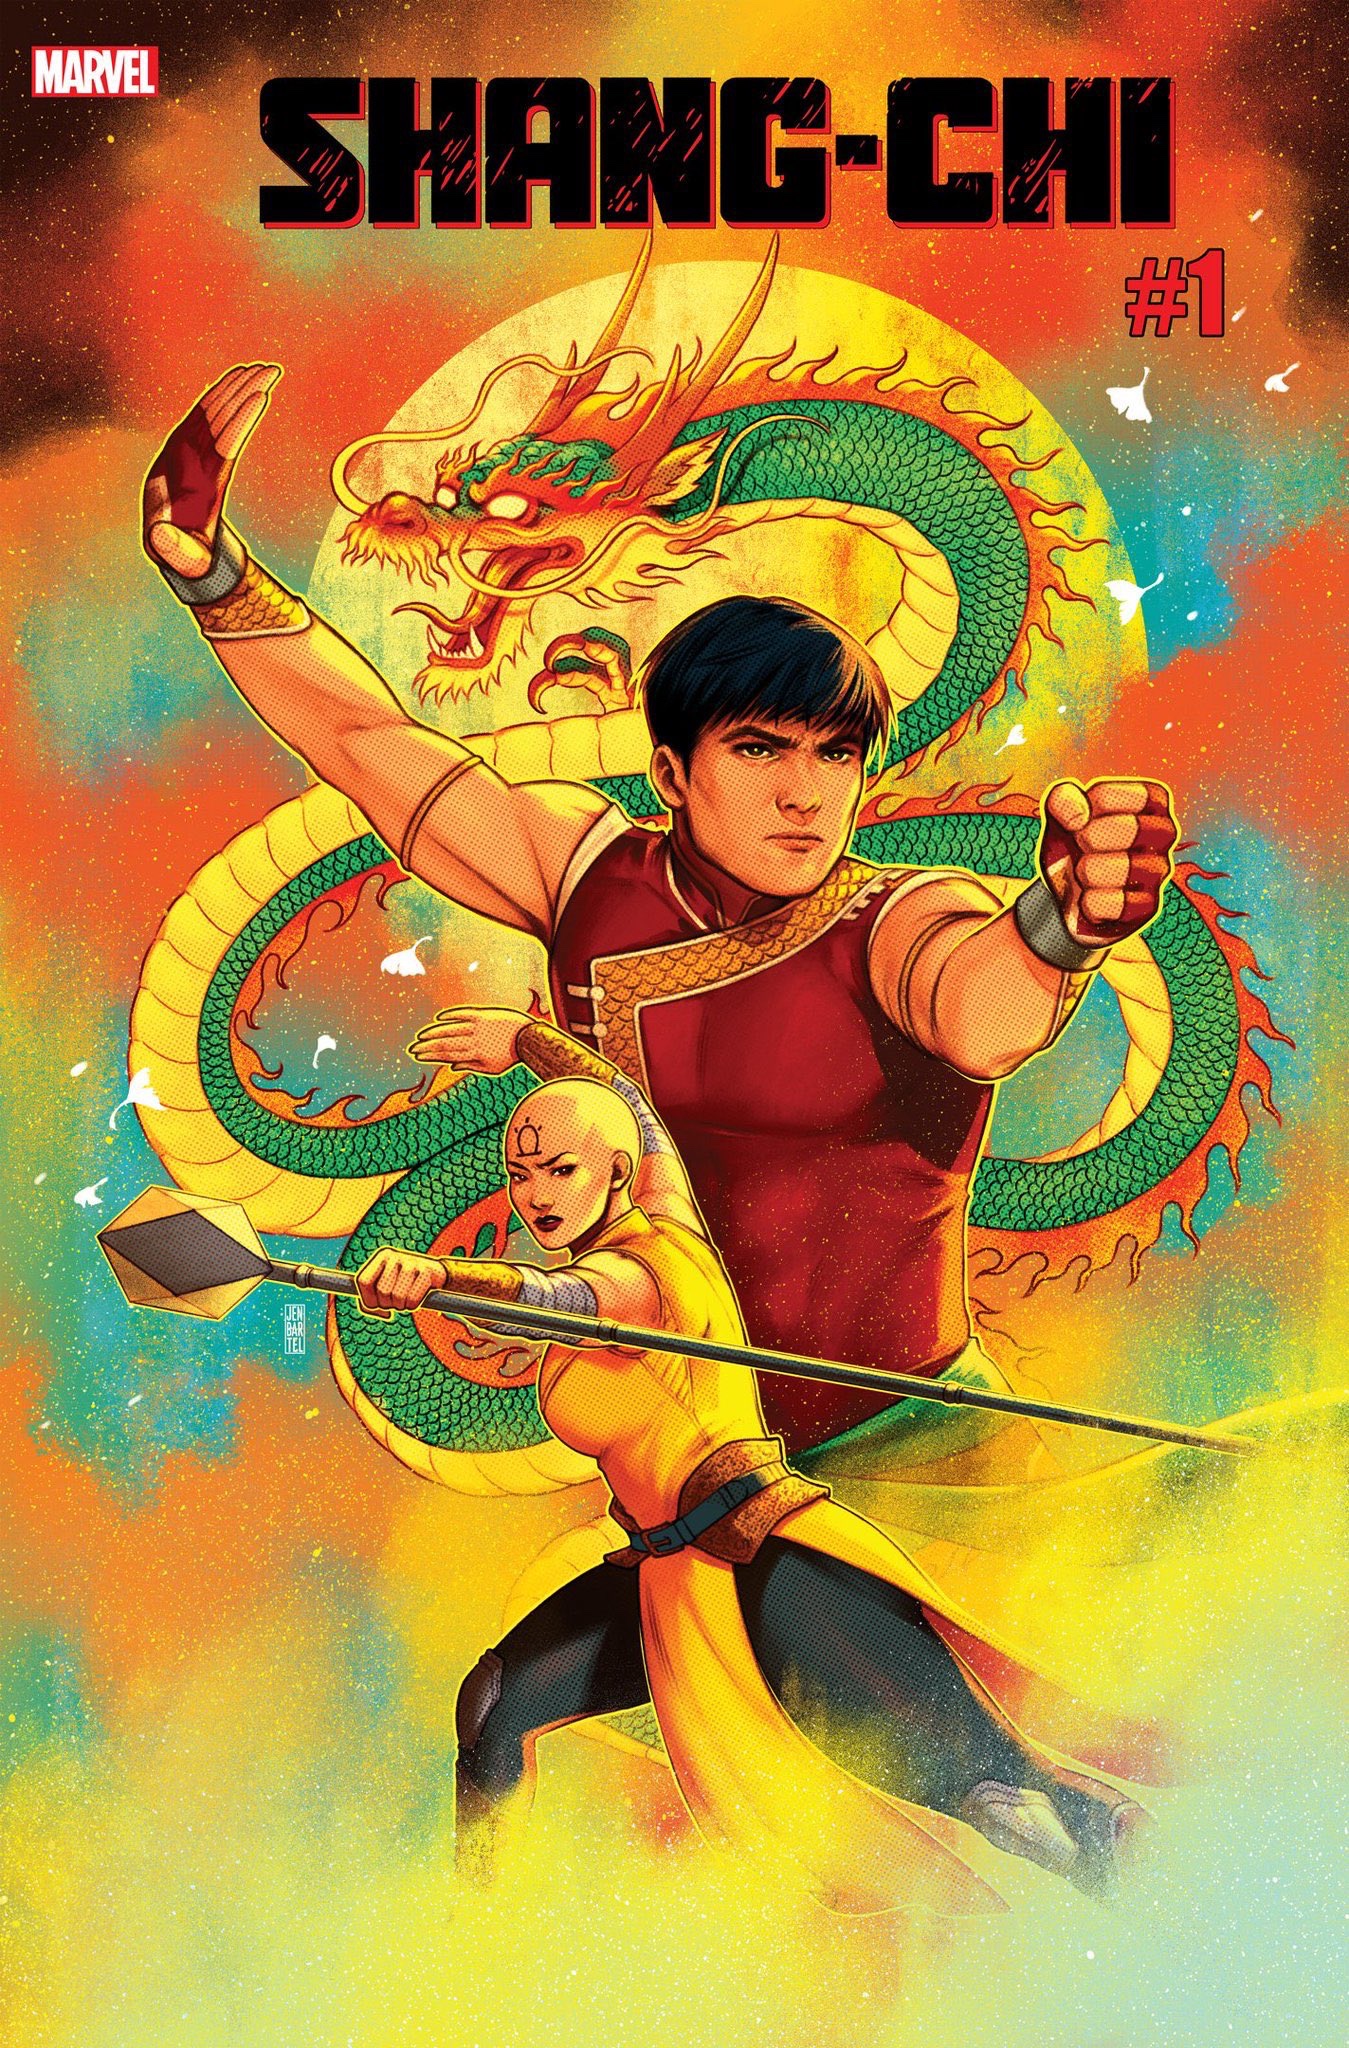 Shang Chi #1 Variant Cover by Jen Bartel